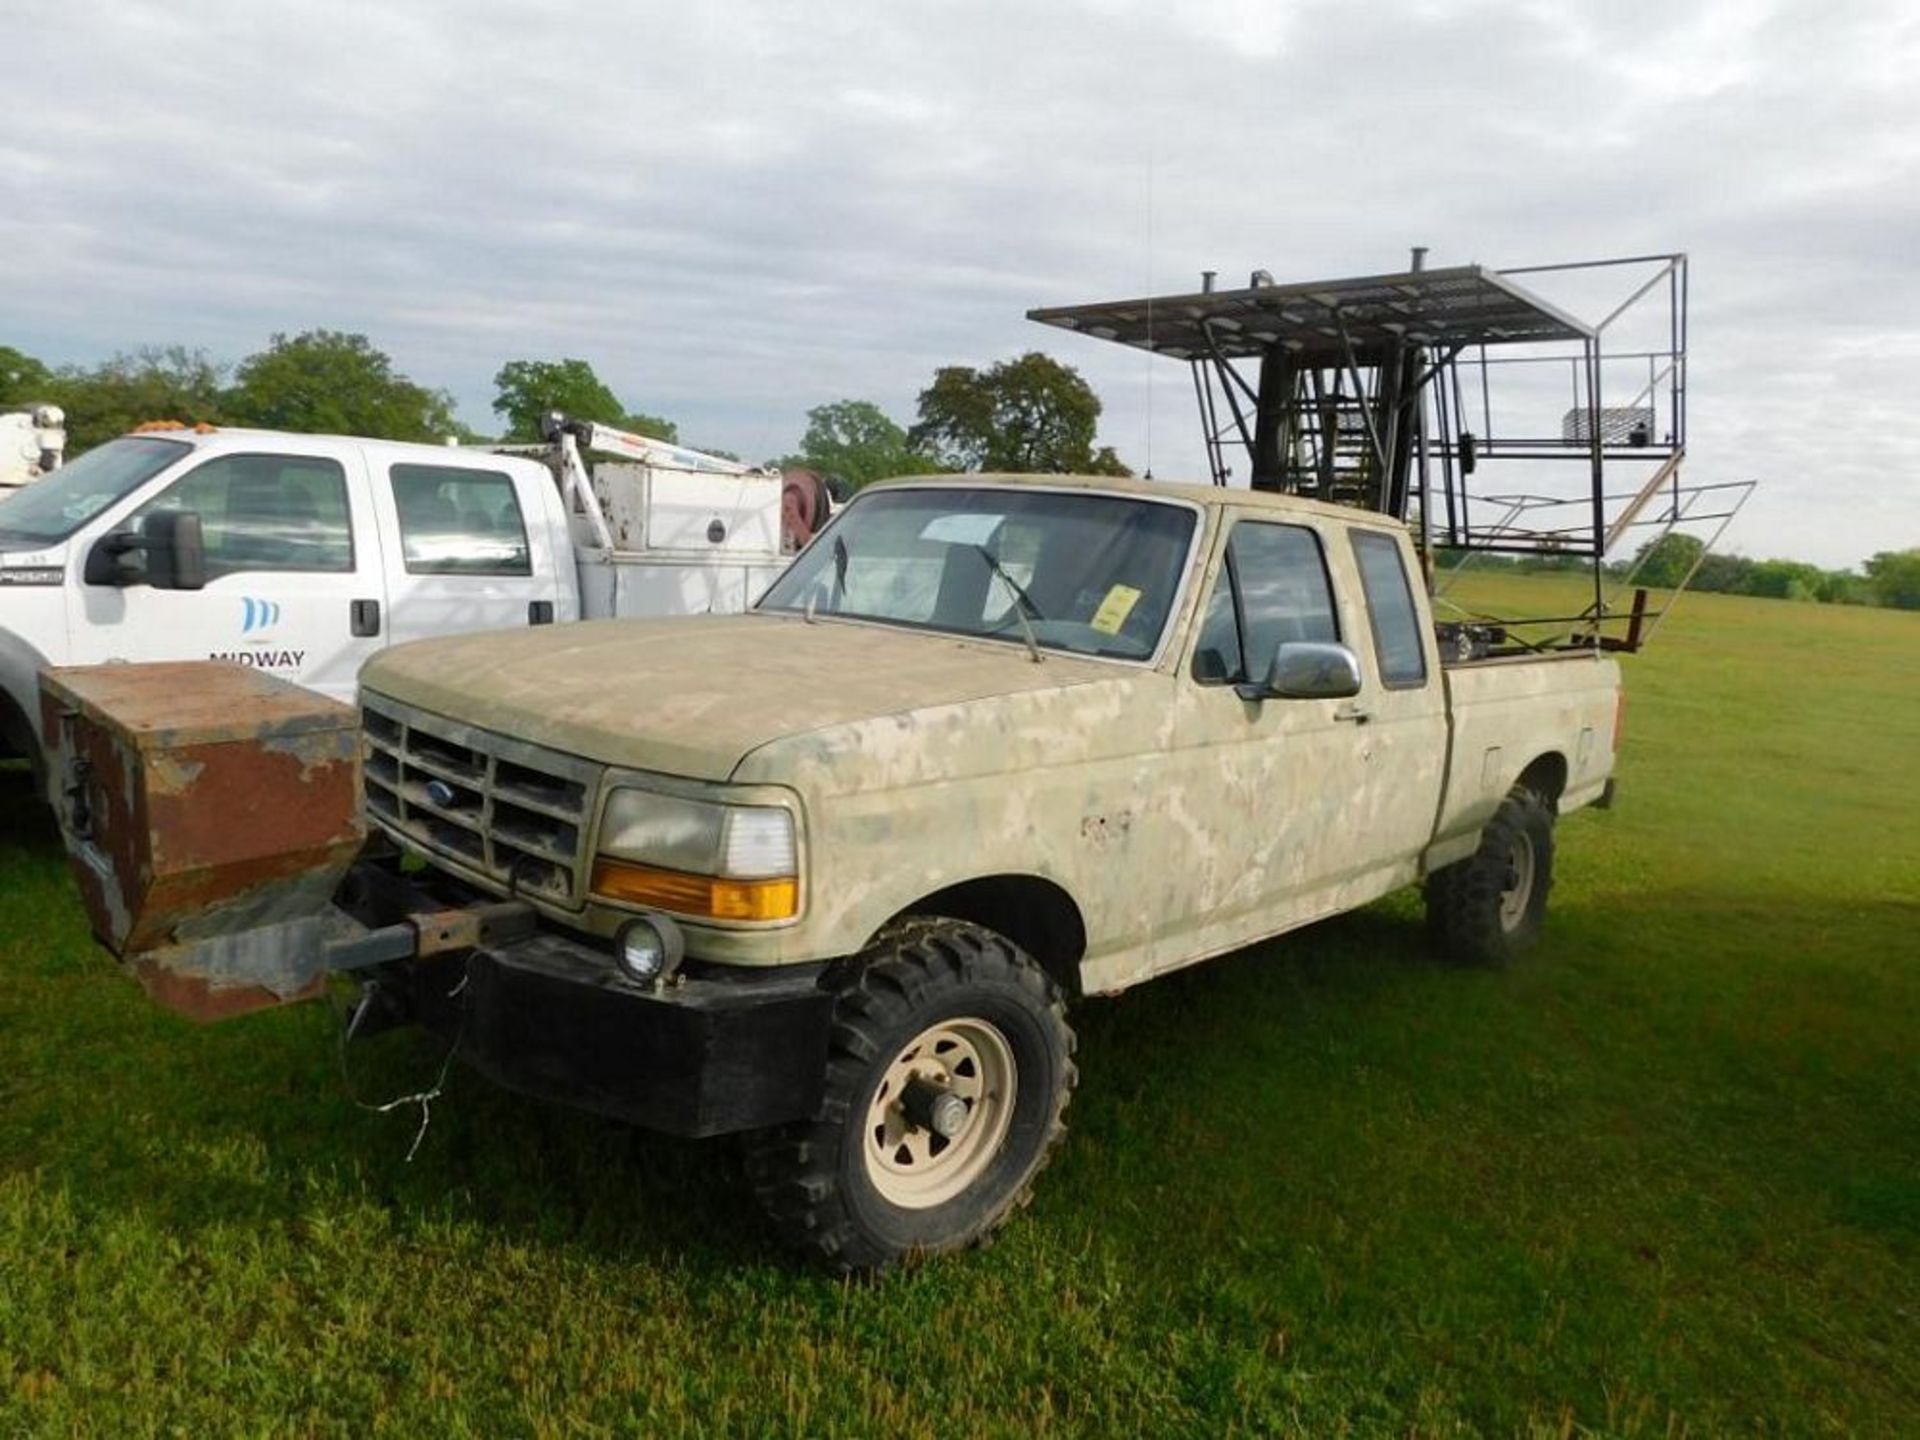 1993 Ford F-150 4x4 Extended Cab Hunting Truck with Platform & Winch, VIN 1FTEX14N1PKA60848, 6-1/2 f